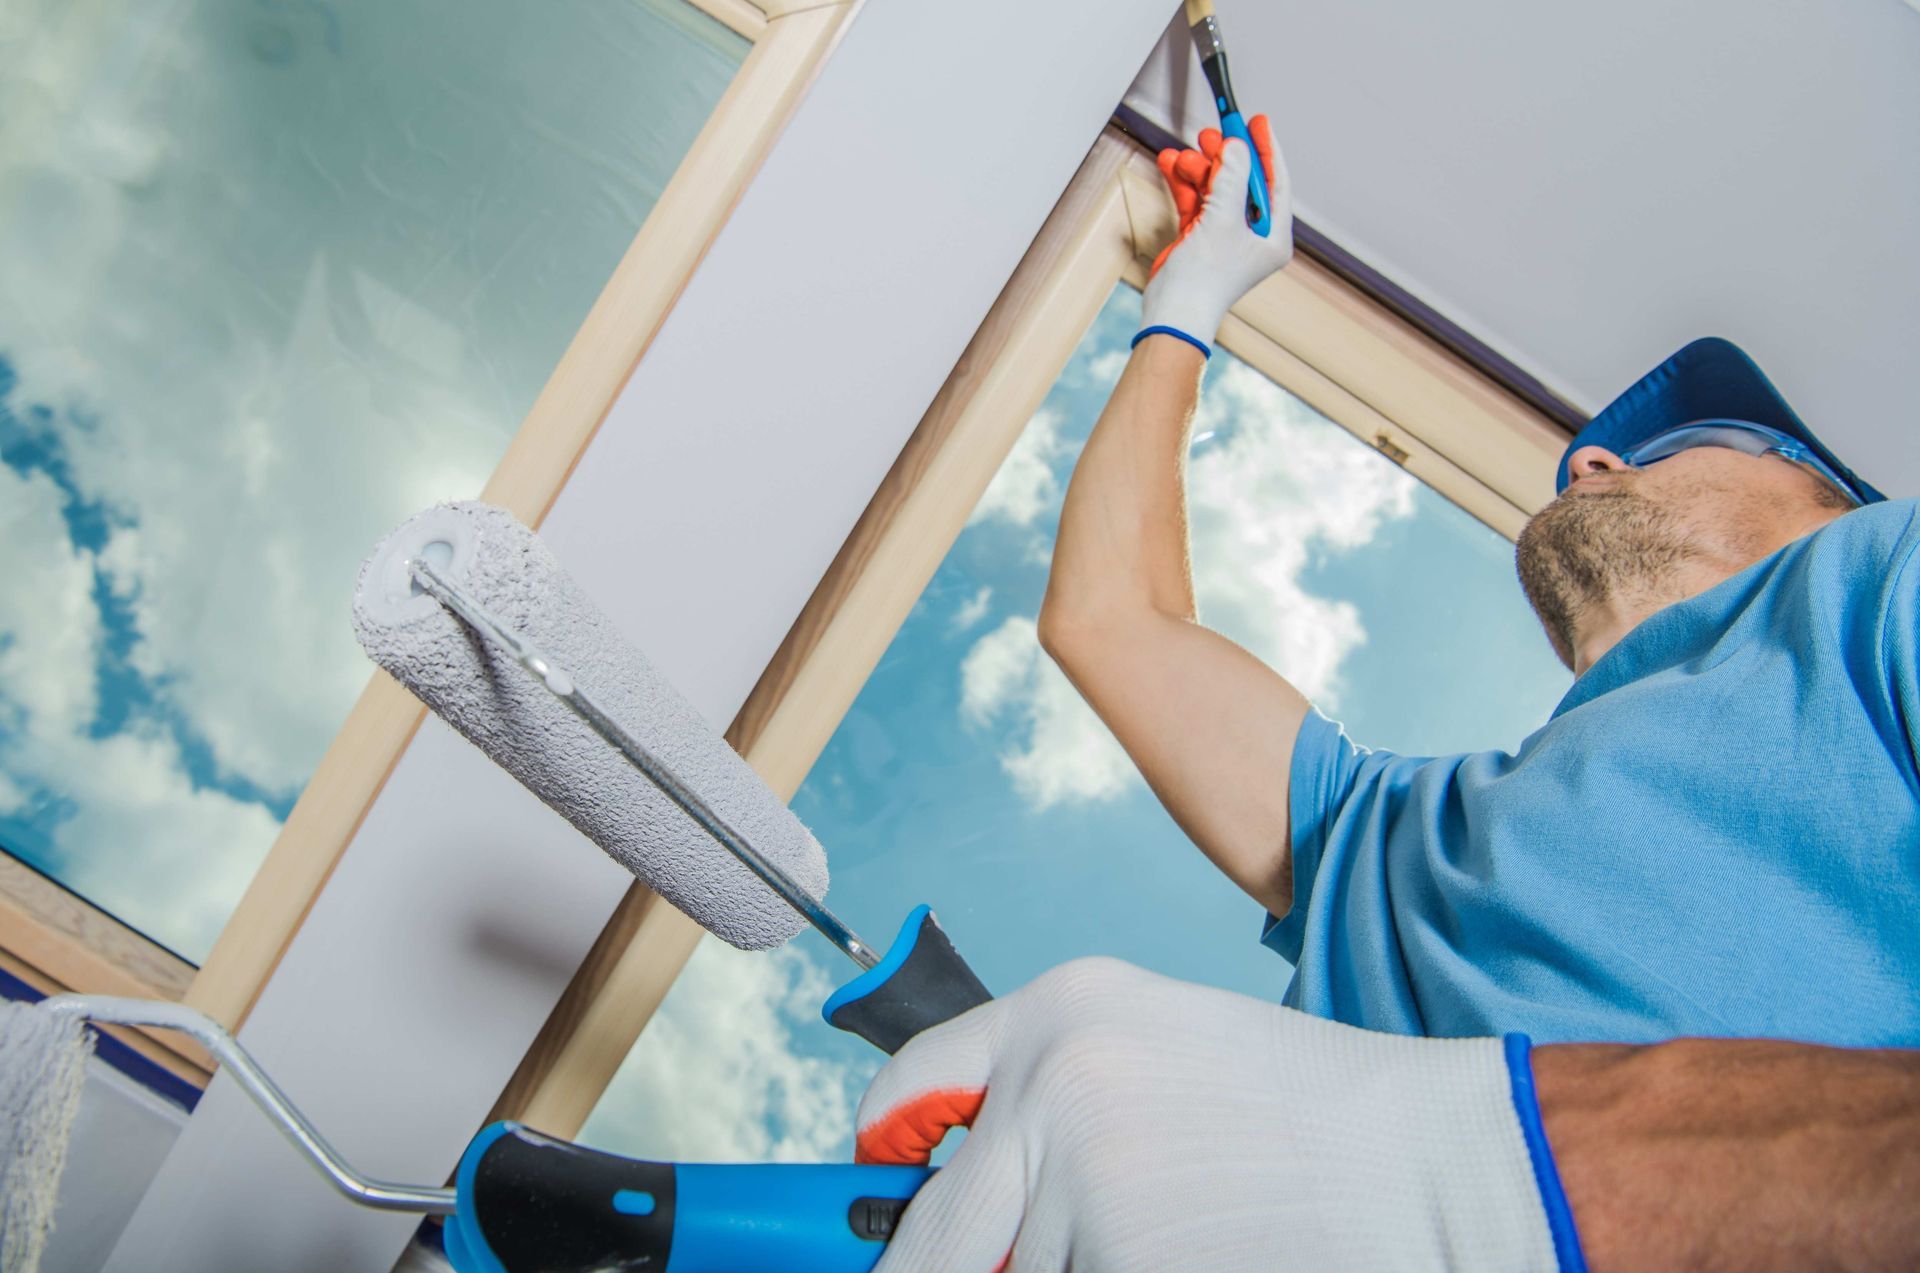 A man is painting the ceiling of a room with a roller